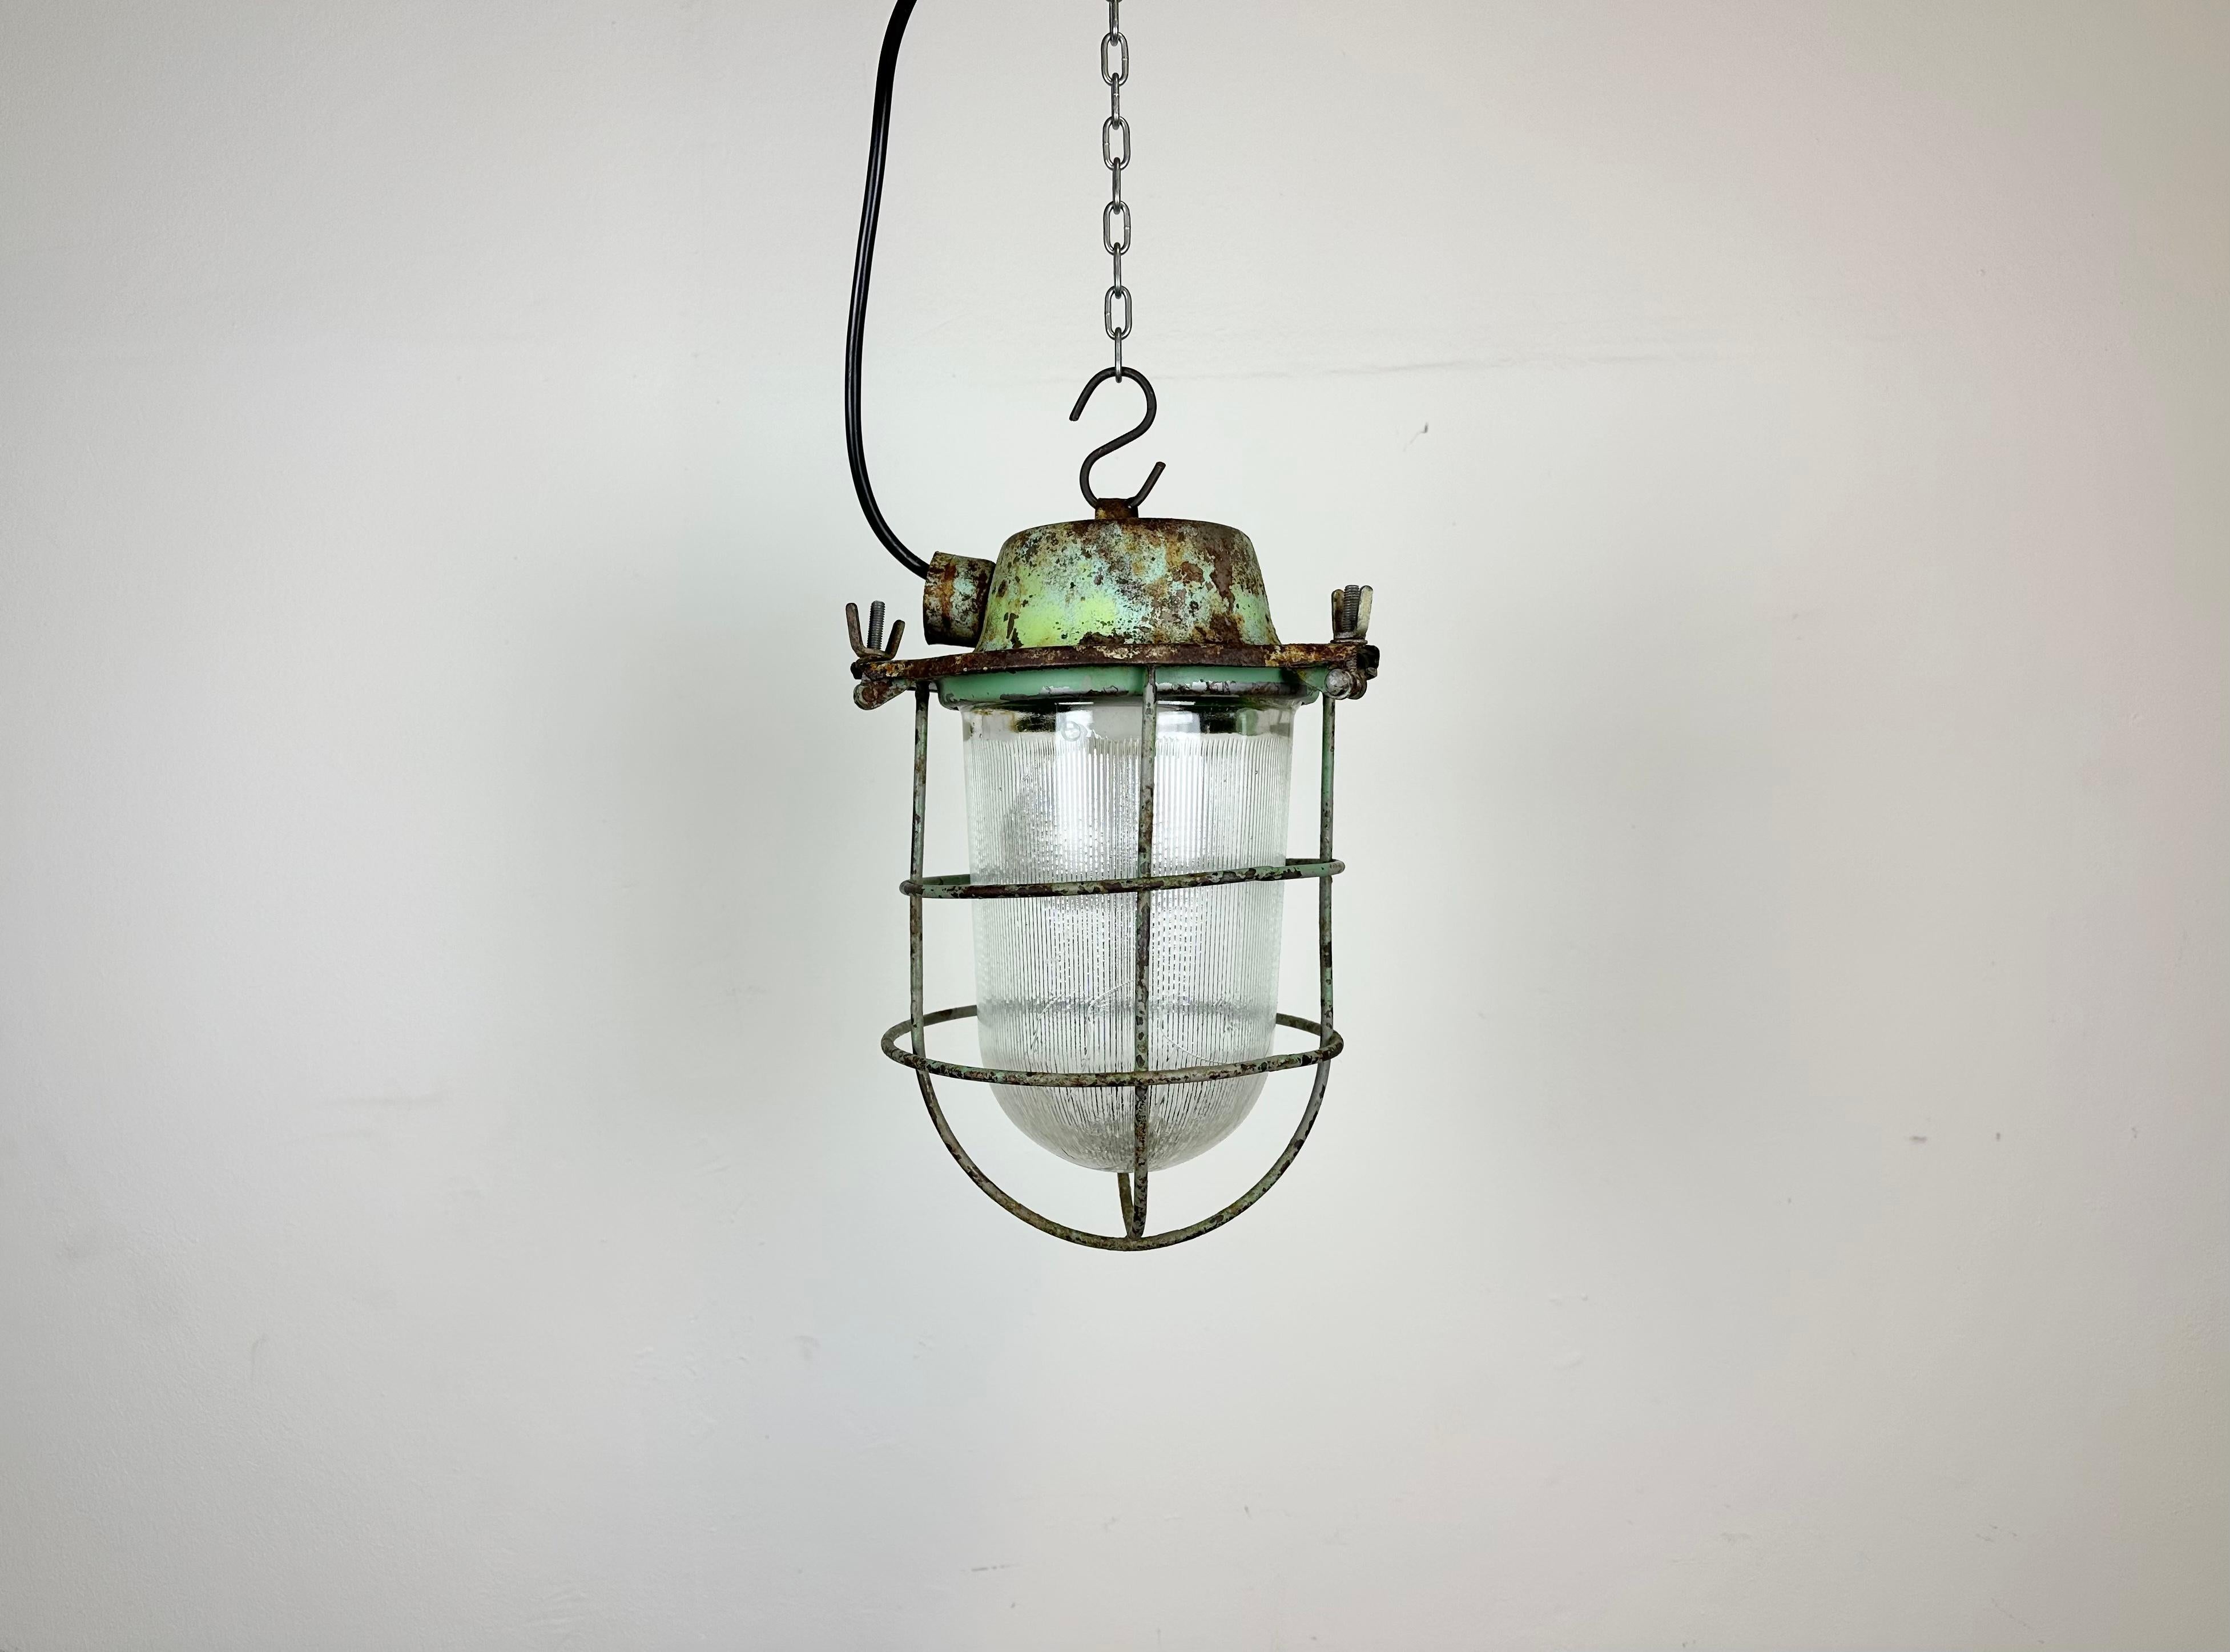 - Vintage Industrial lamp from the 1960s 
- Made in former Soviet Union
- Green iron top and grid
- Stripped glass cover
- The socket requires E 27/ E26 lightbulbs 
- New wire 
- Diameter: 22 cm
- Weight : 3 kg.